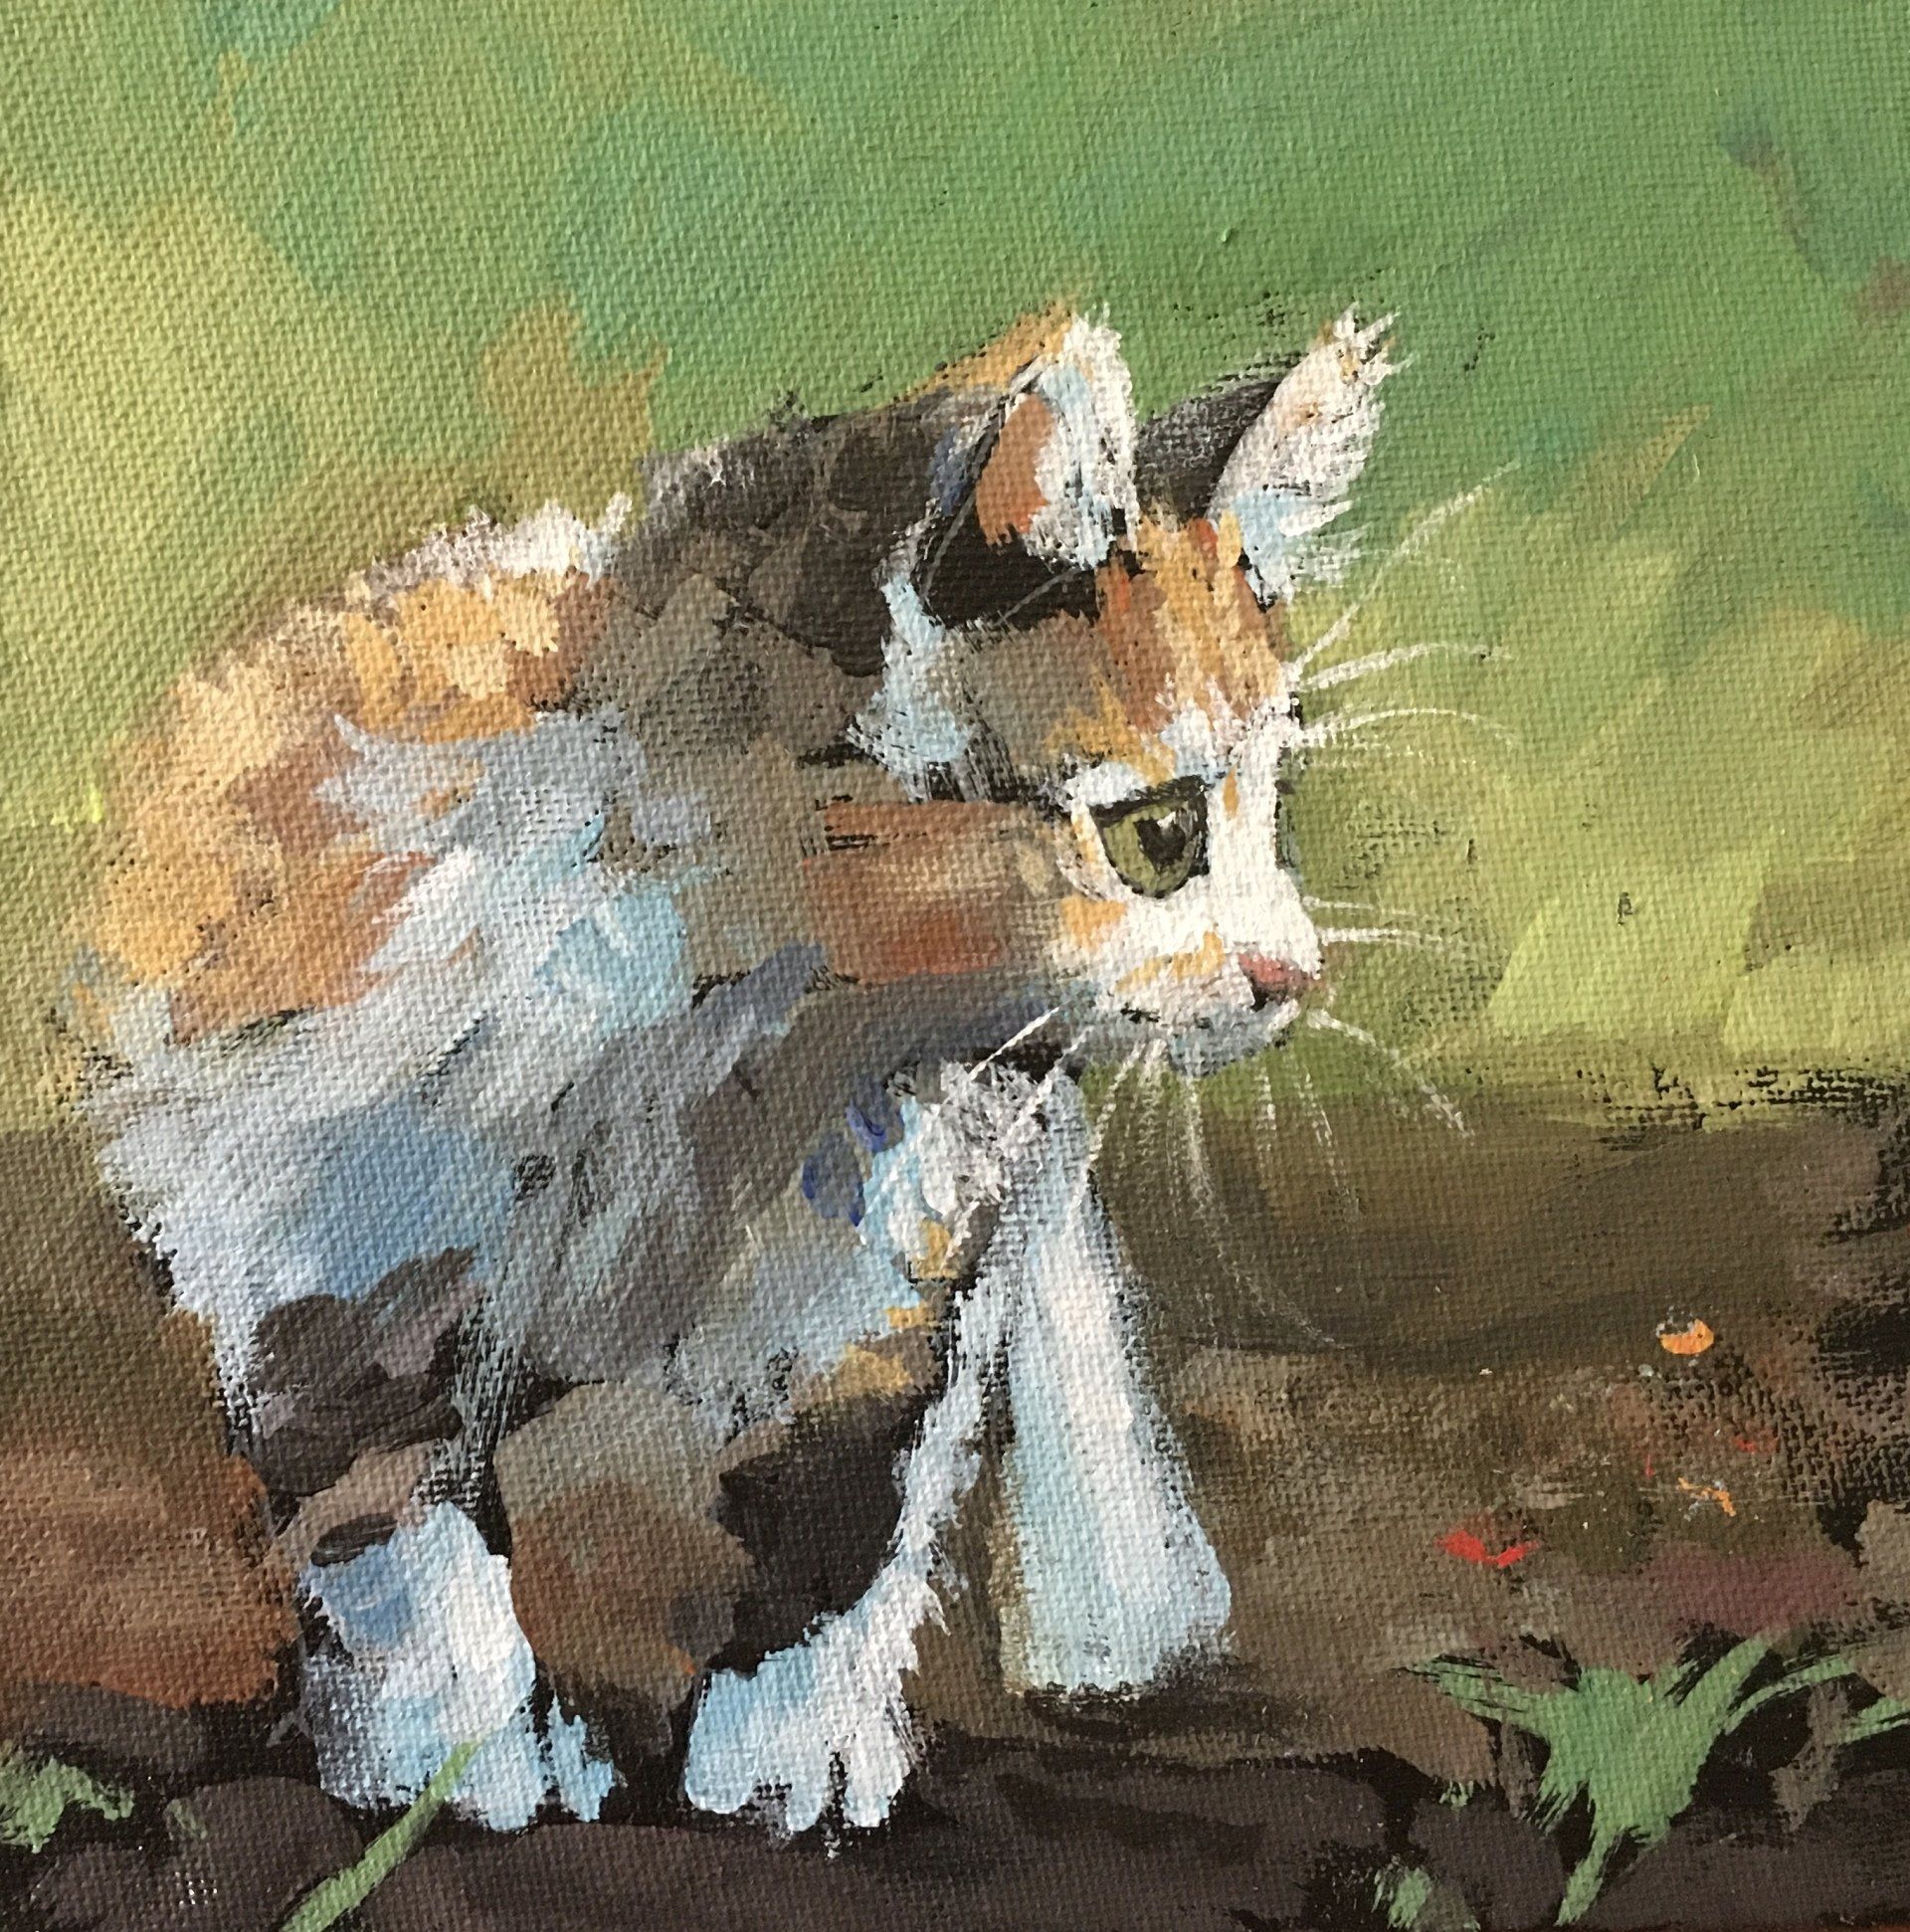 acrylic painting of a cat wandering around the muddy forest